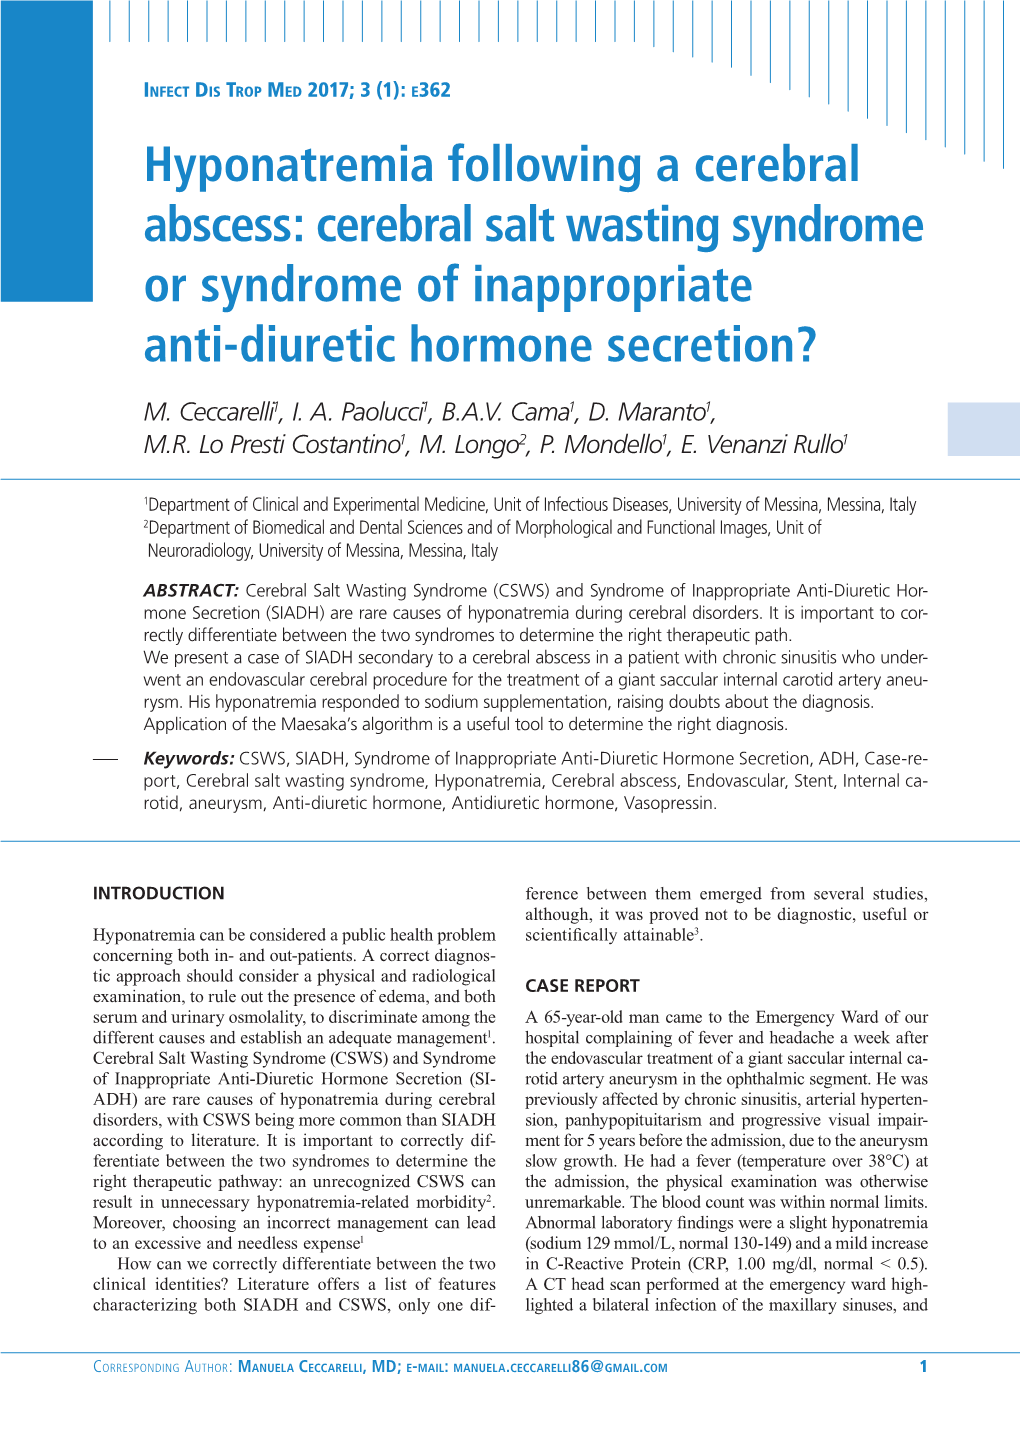 Hyponatremia Following a Cerebral Abscess: Cerebral Salt Wasting Syndrome Or Syndrome of Inappropriate Anti-Diuretic Hormone Secretion?